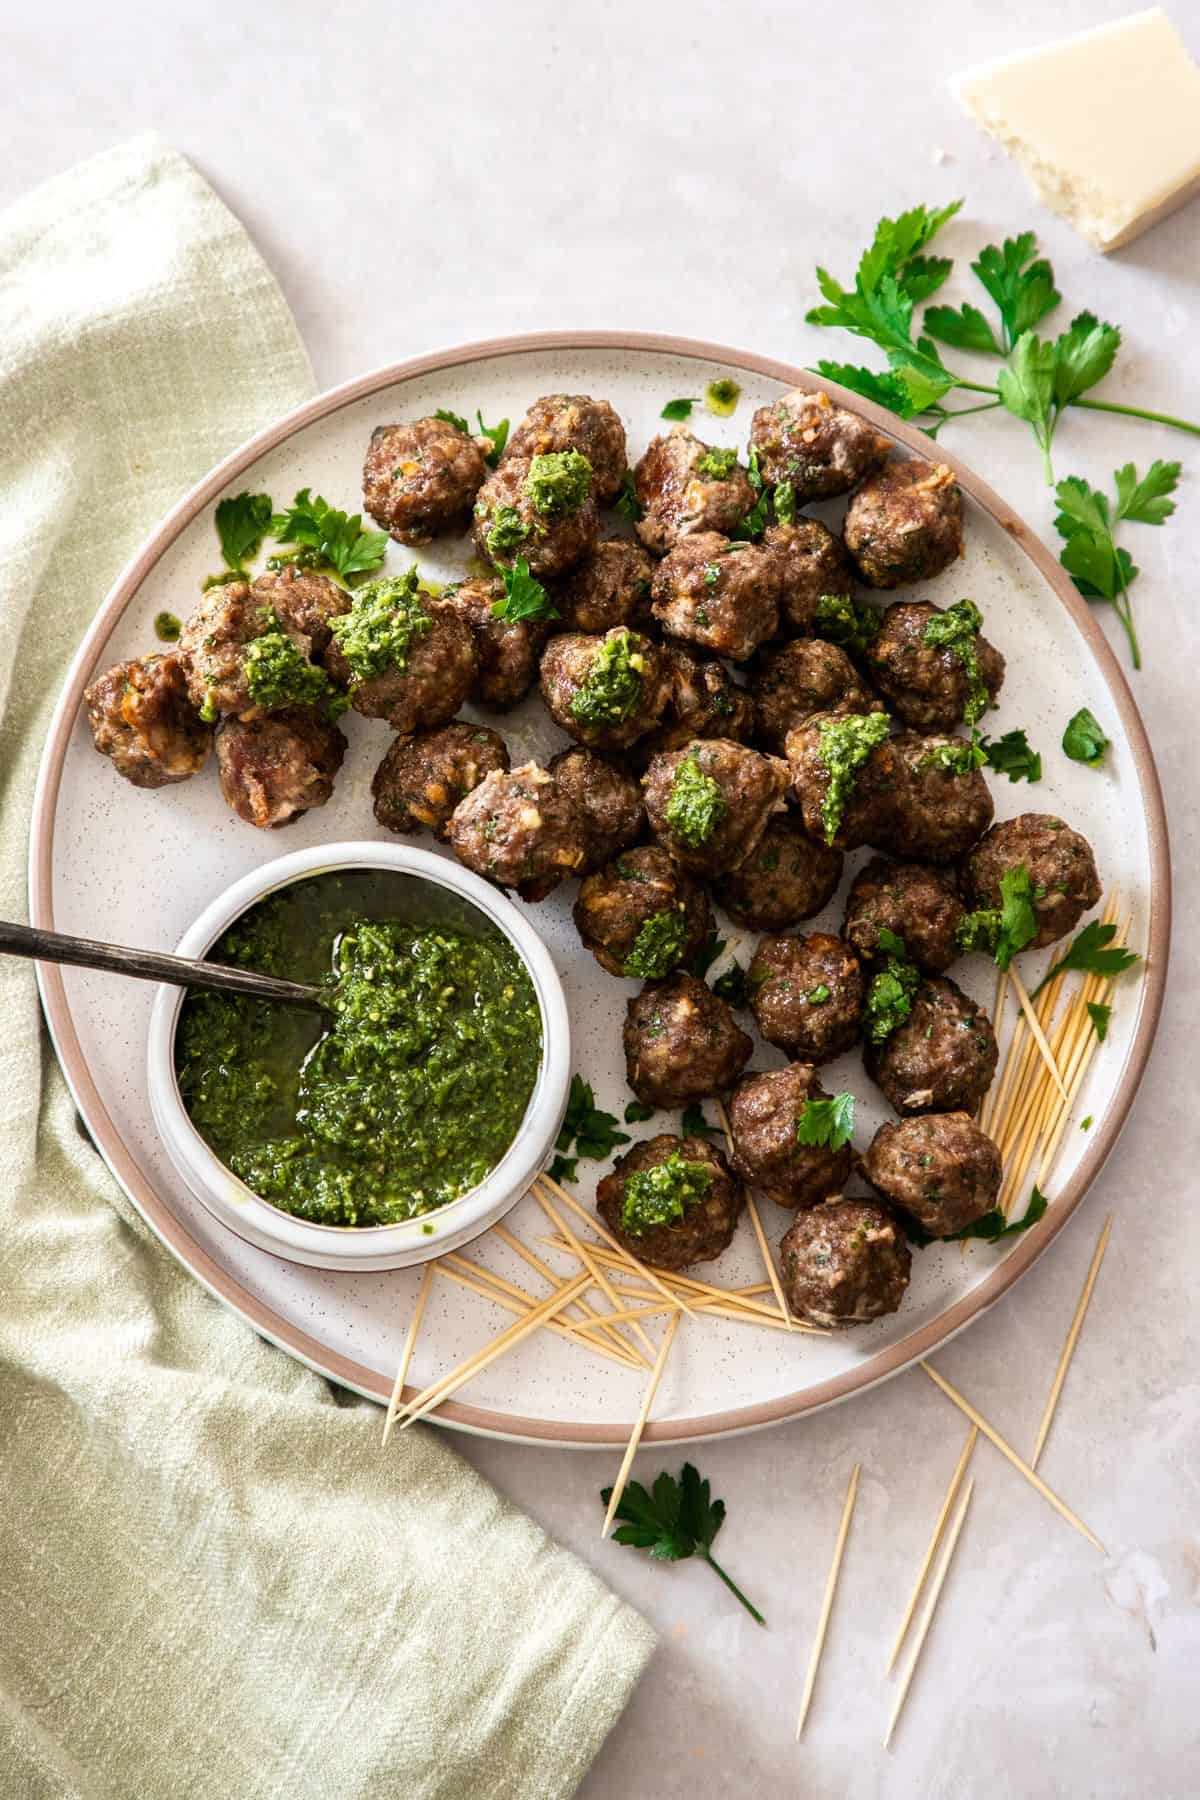 Round plate of meatballs, with a bowl of pesto on the edge and some toothpicks.